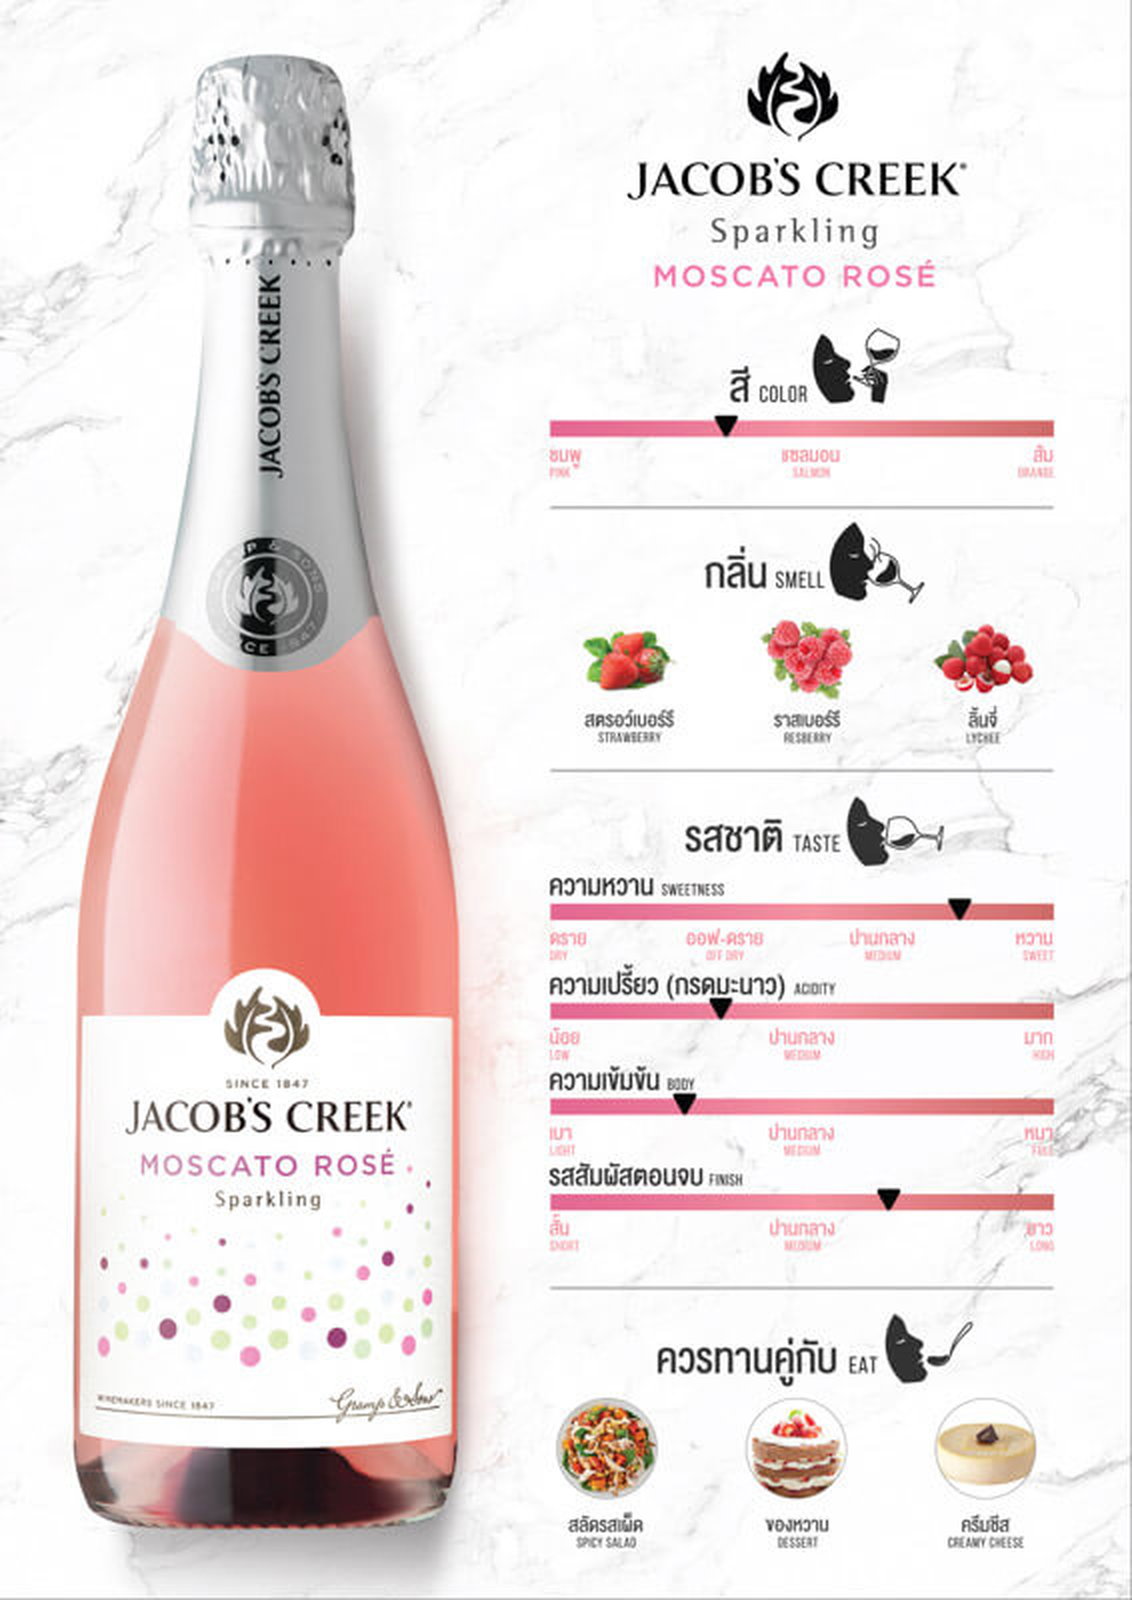 Jacob's Creek Moscato Rose tasting note